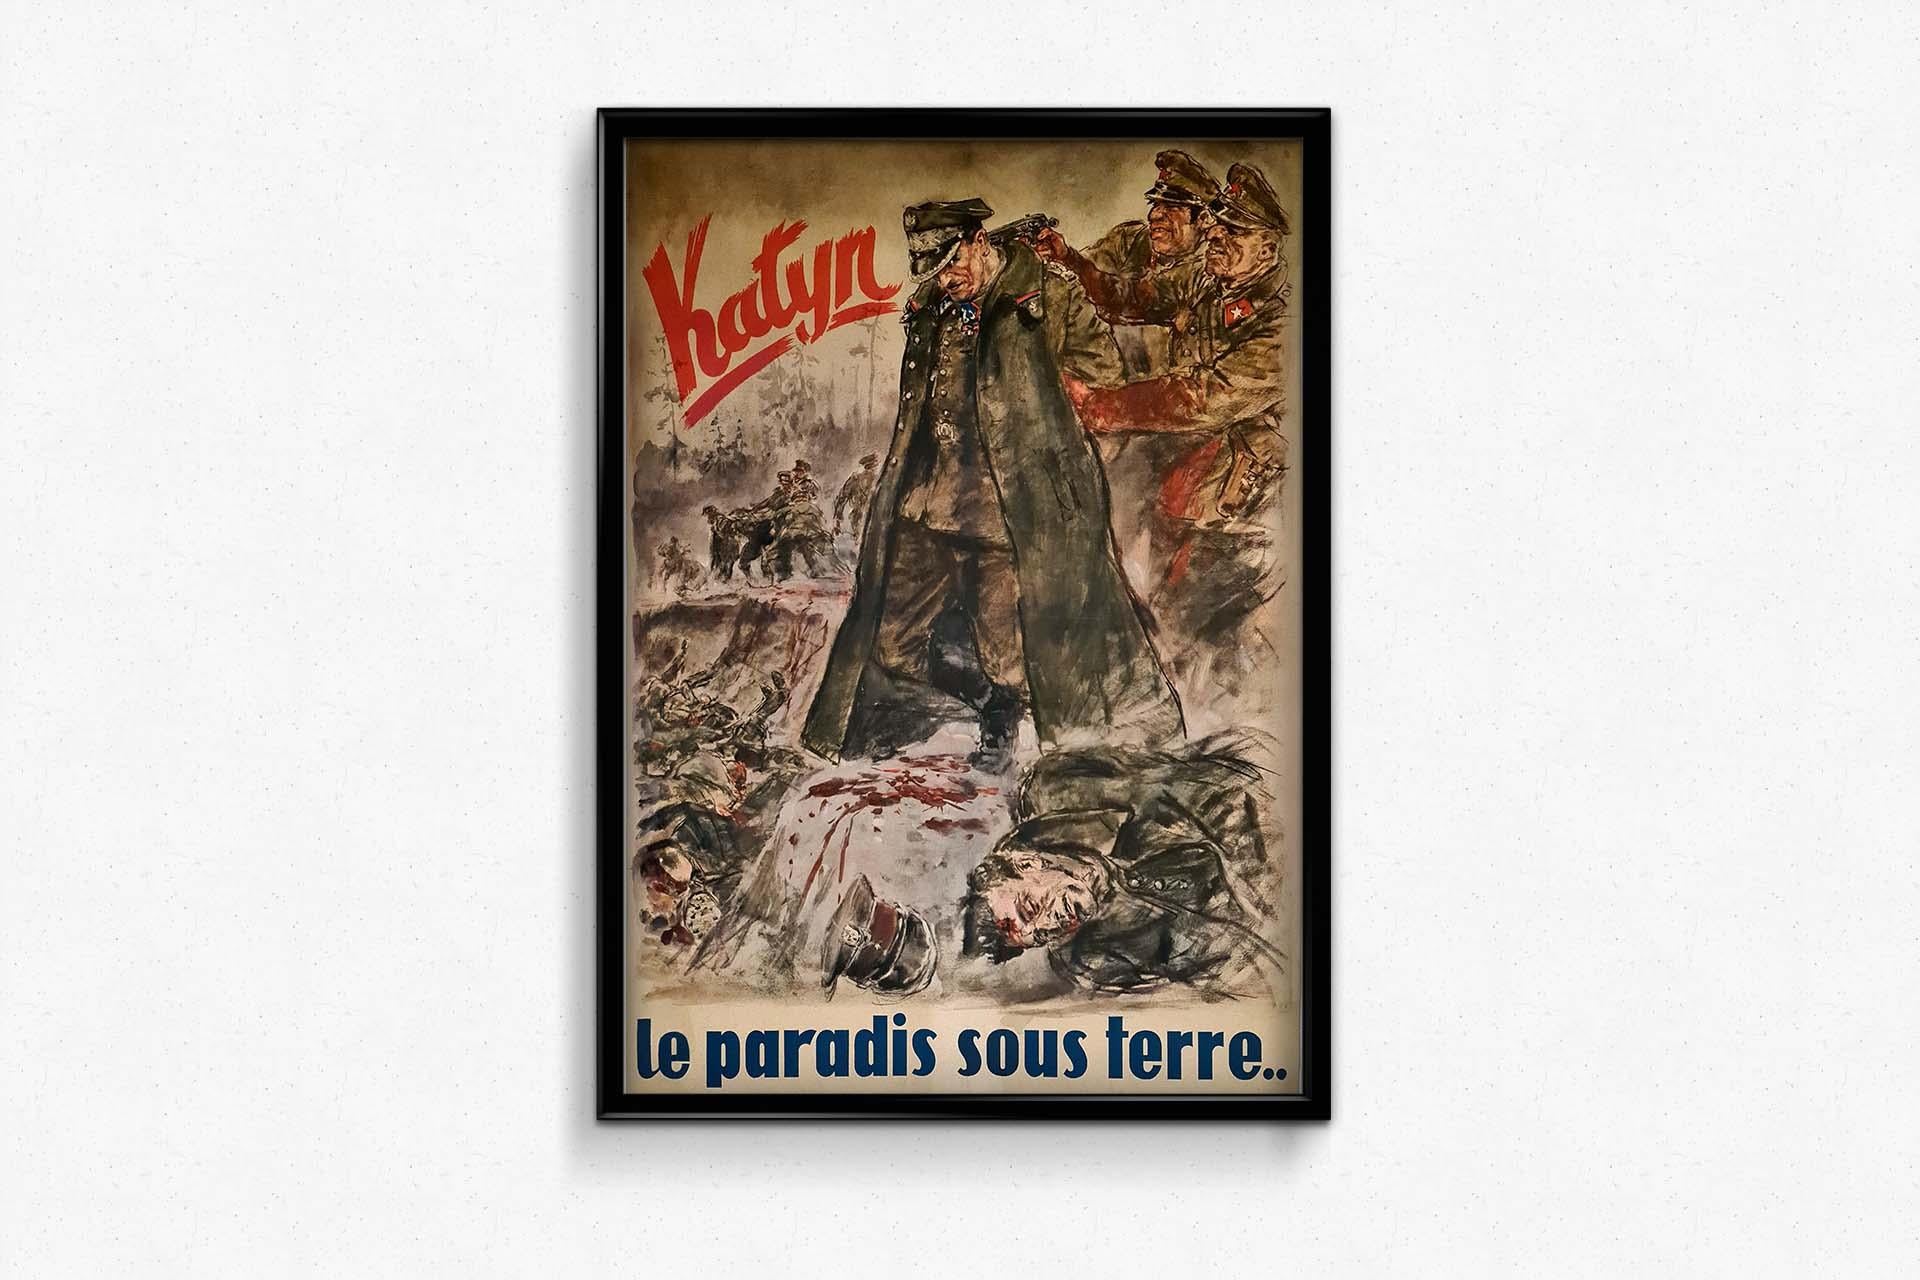 The 1943 poster titled 